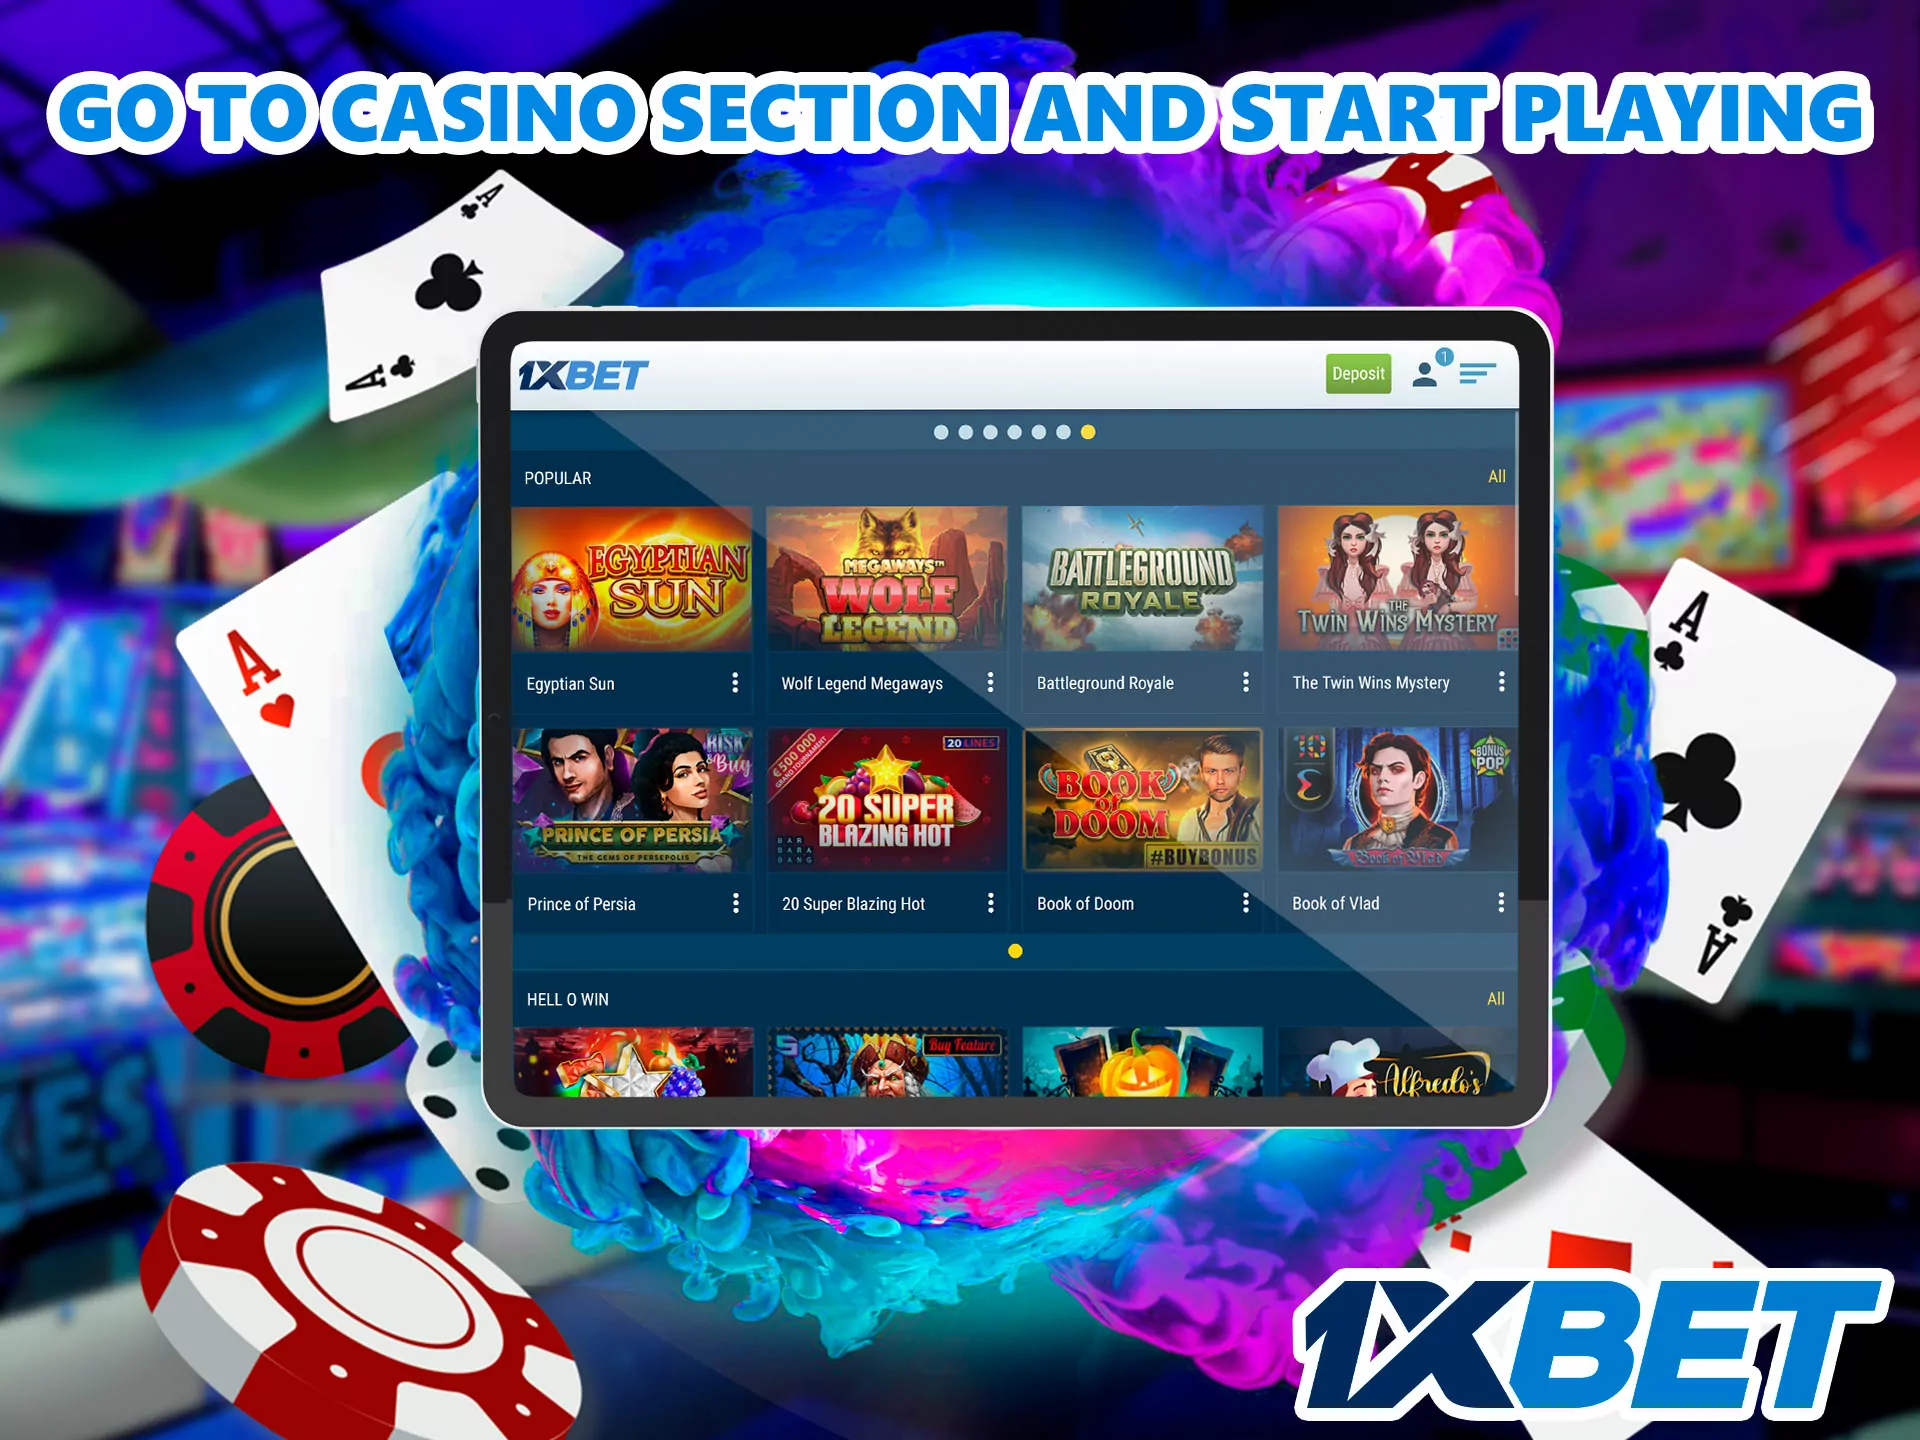 Now, you need to select your favorite section on the 1xbet website from the list, and you are in the game.